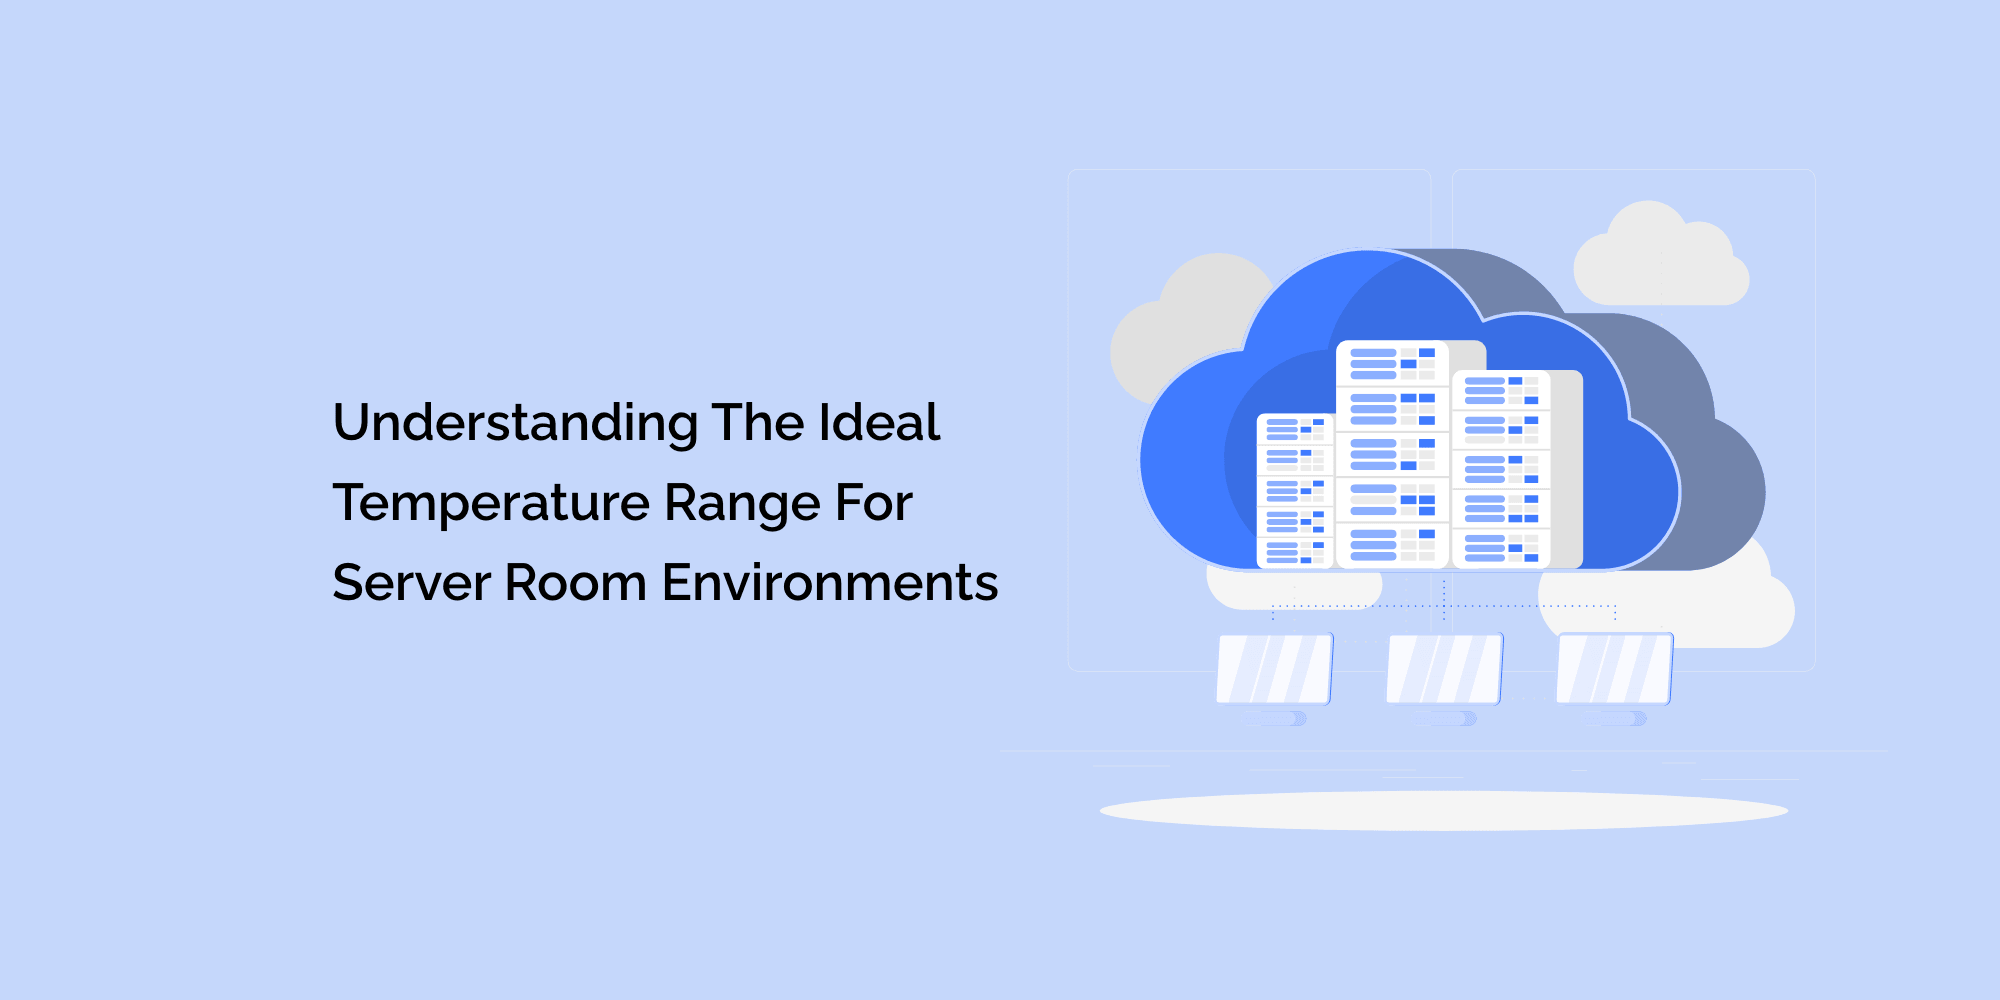 Understanding the Ideal Temperature Range for Server Room Environments